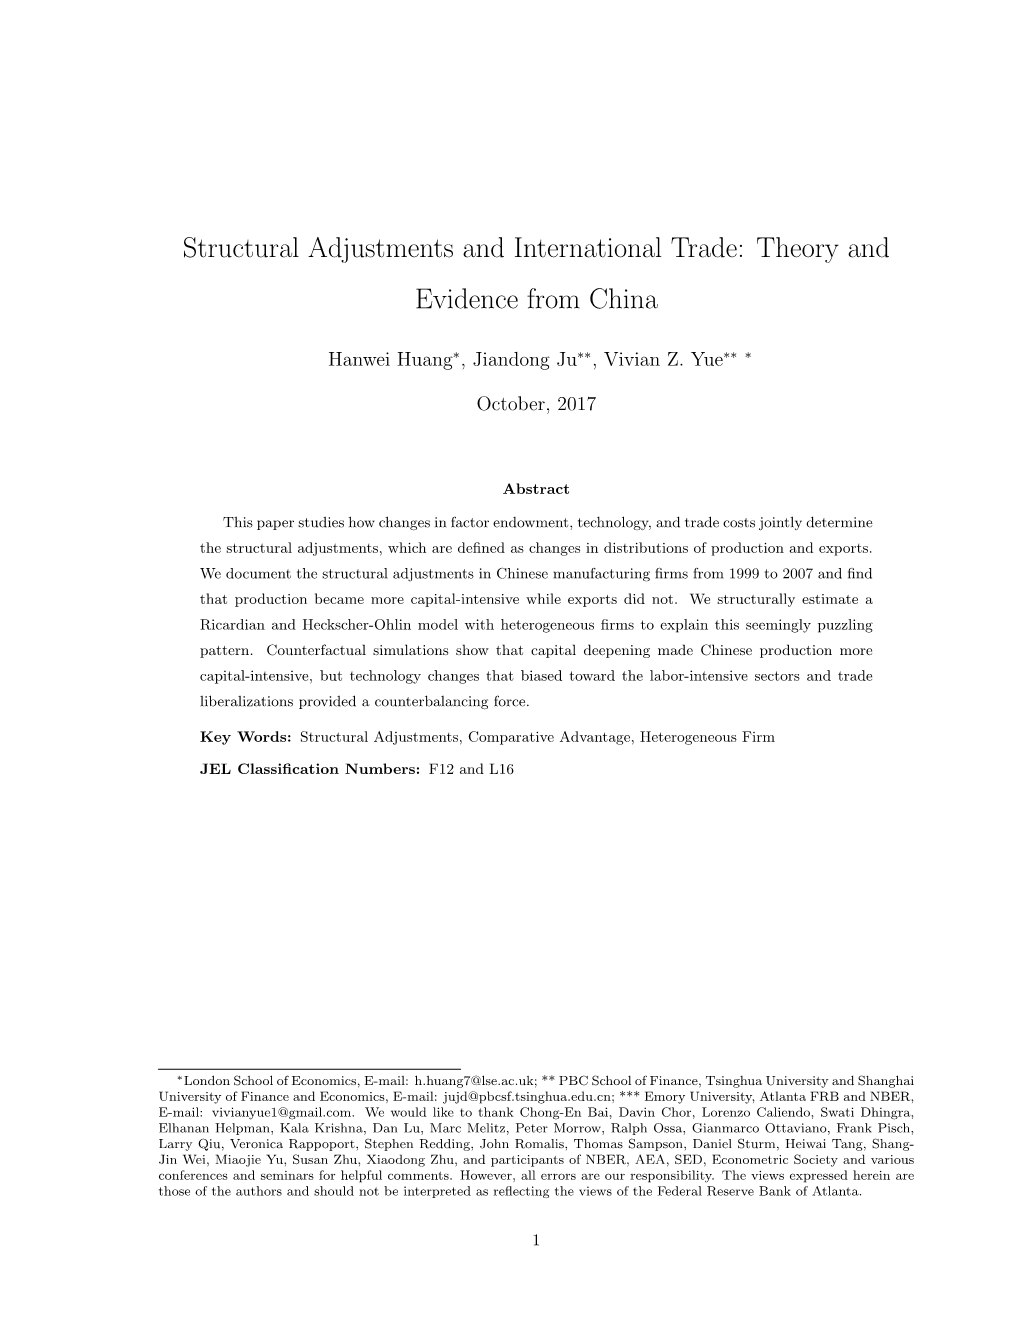 Structural Adjustments and International Trade: Theory and Evidence from China